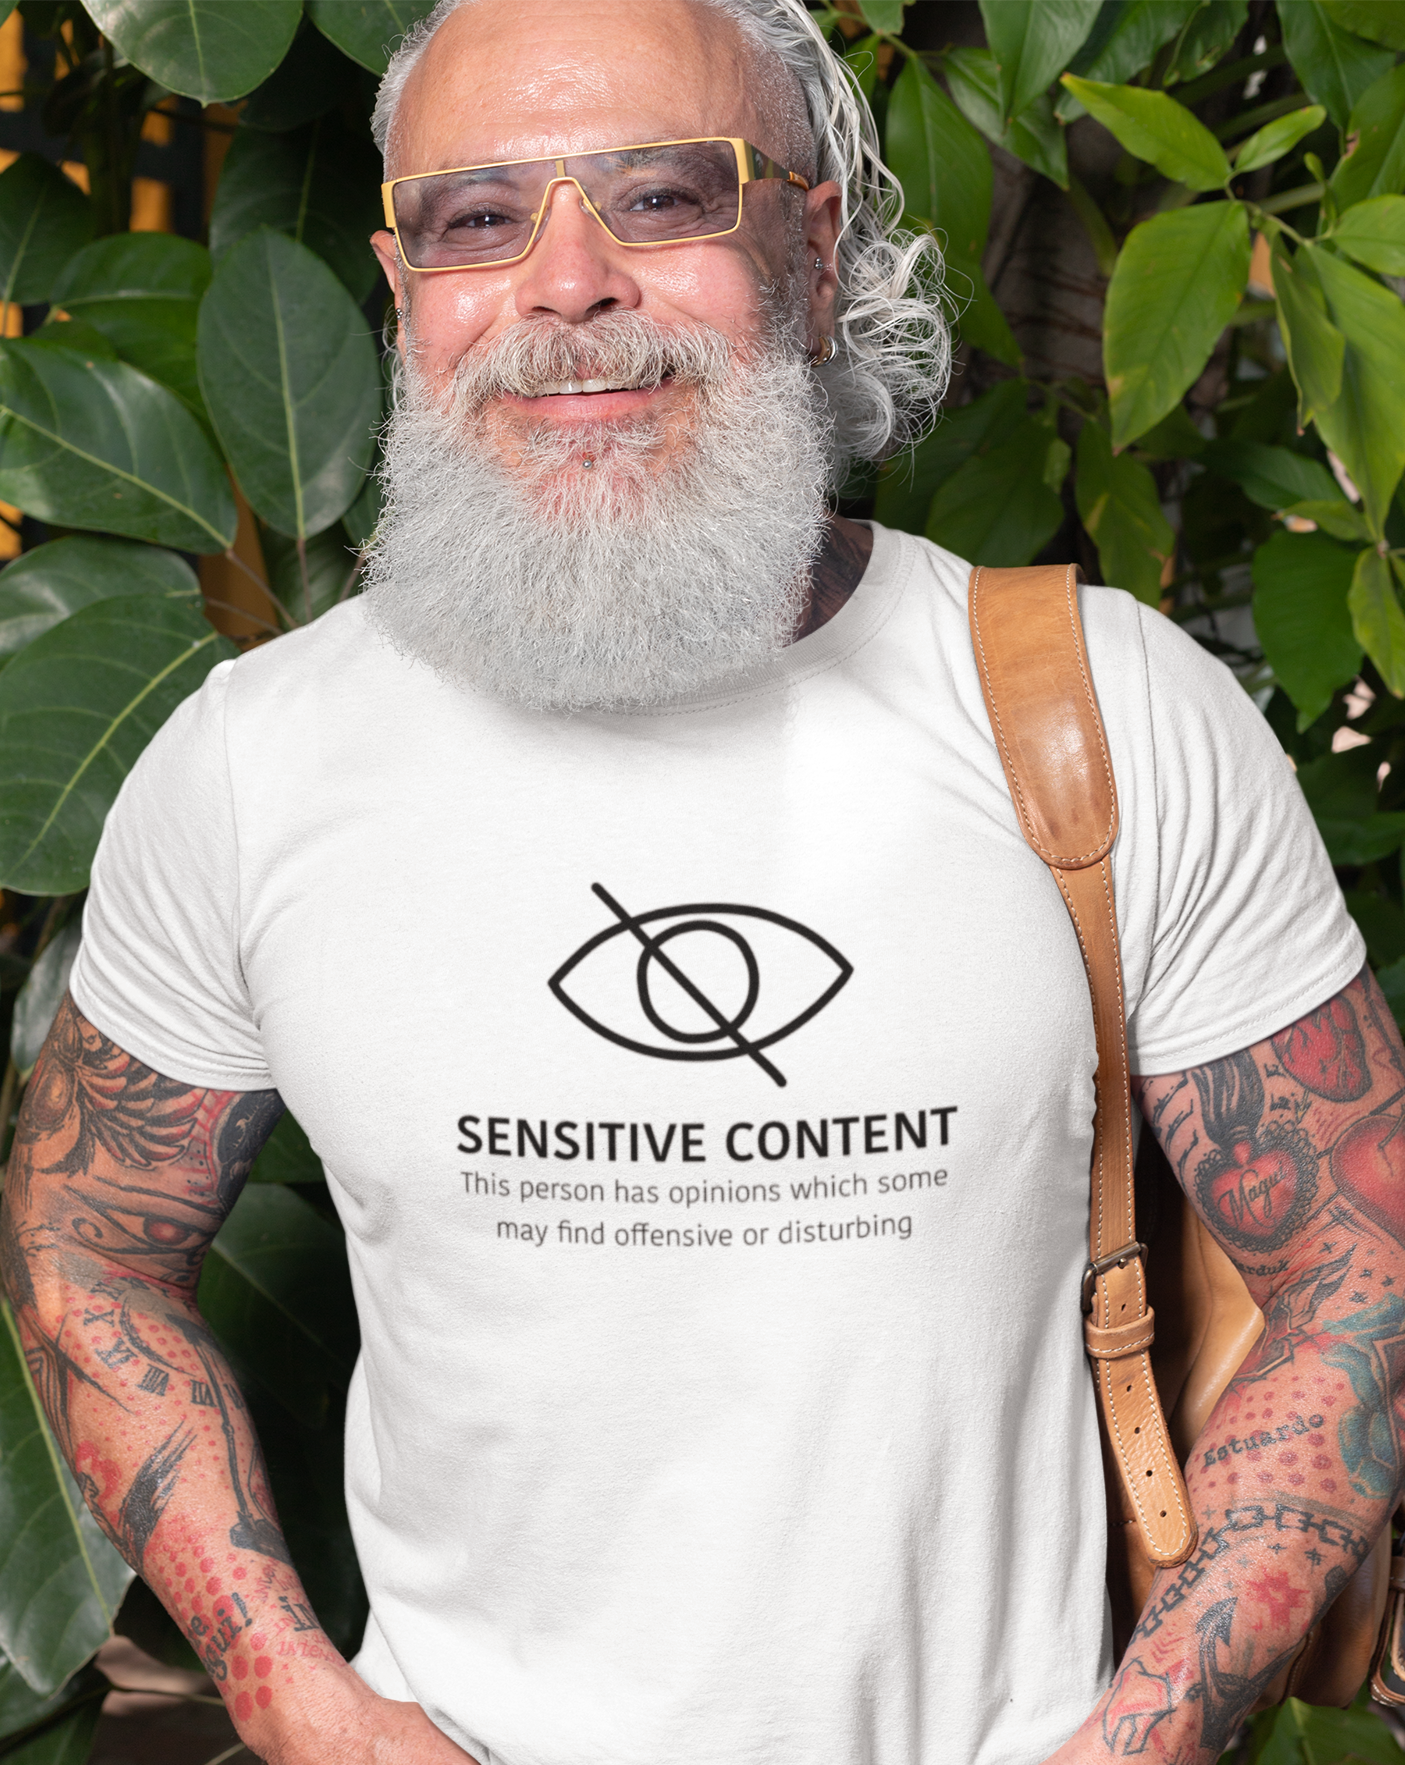 Sensitive Content! This cotton t-shirt is perfect for those people with unpopular opinions! Let people know what they are getting into! Makes a great gift for that outspoken uncle at the holidays! 